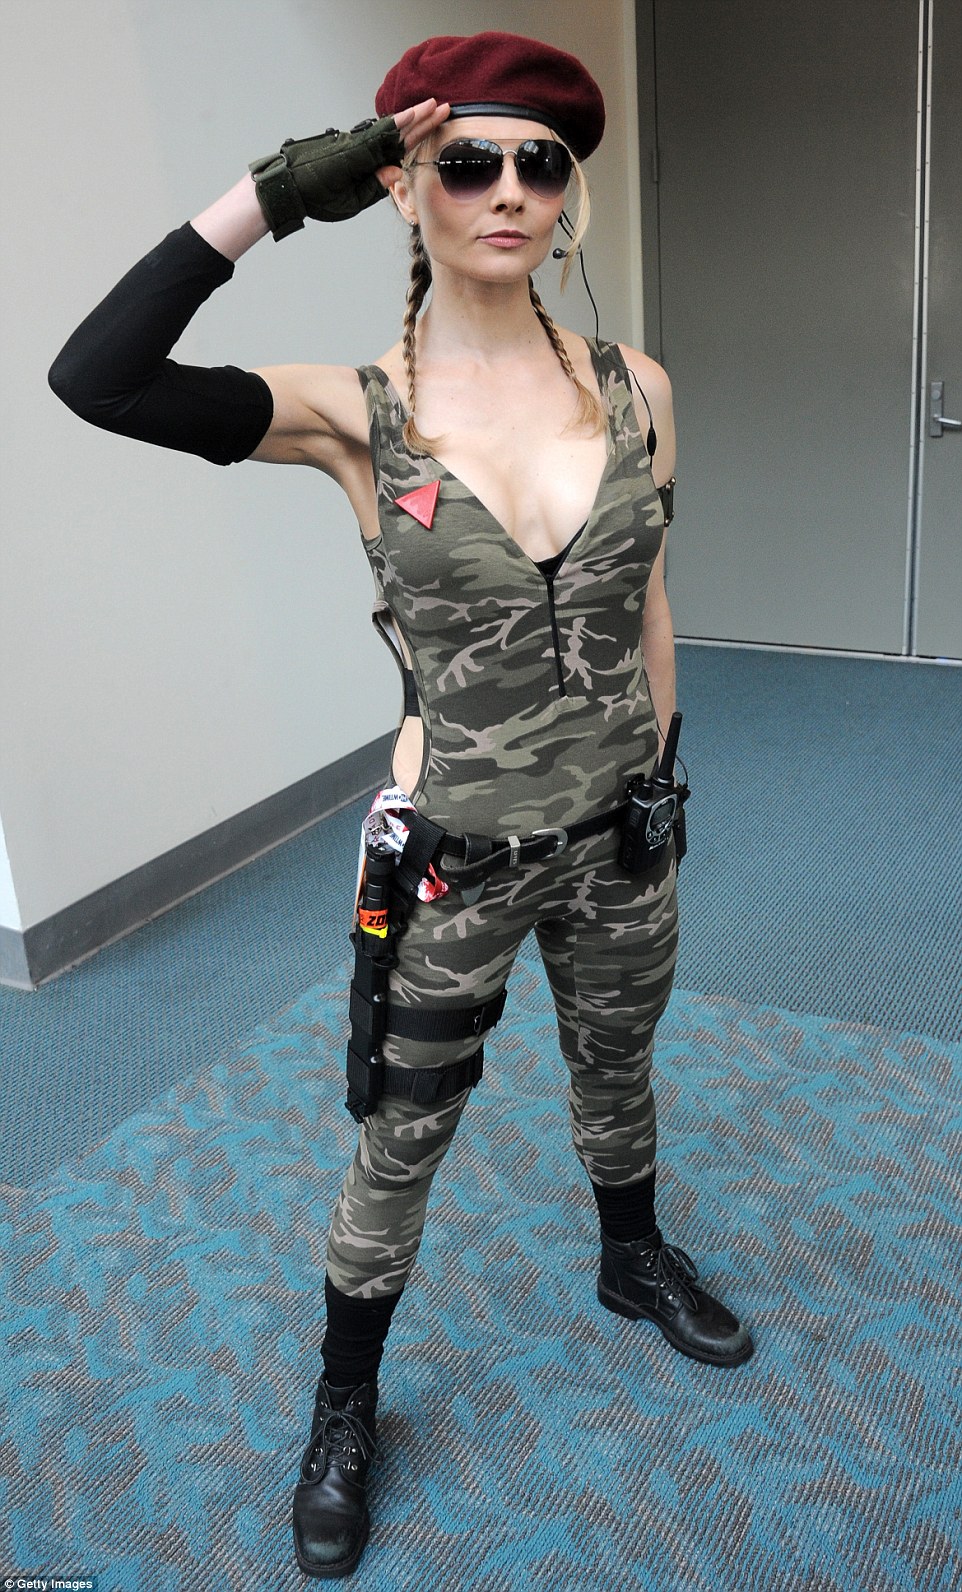 2A654BE400000578-3157610-Attention_A_cosplayer_portrays_a_G_I_Joe_character_during_Comic_-a-73_1436643034785